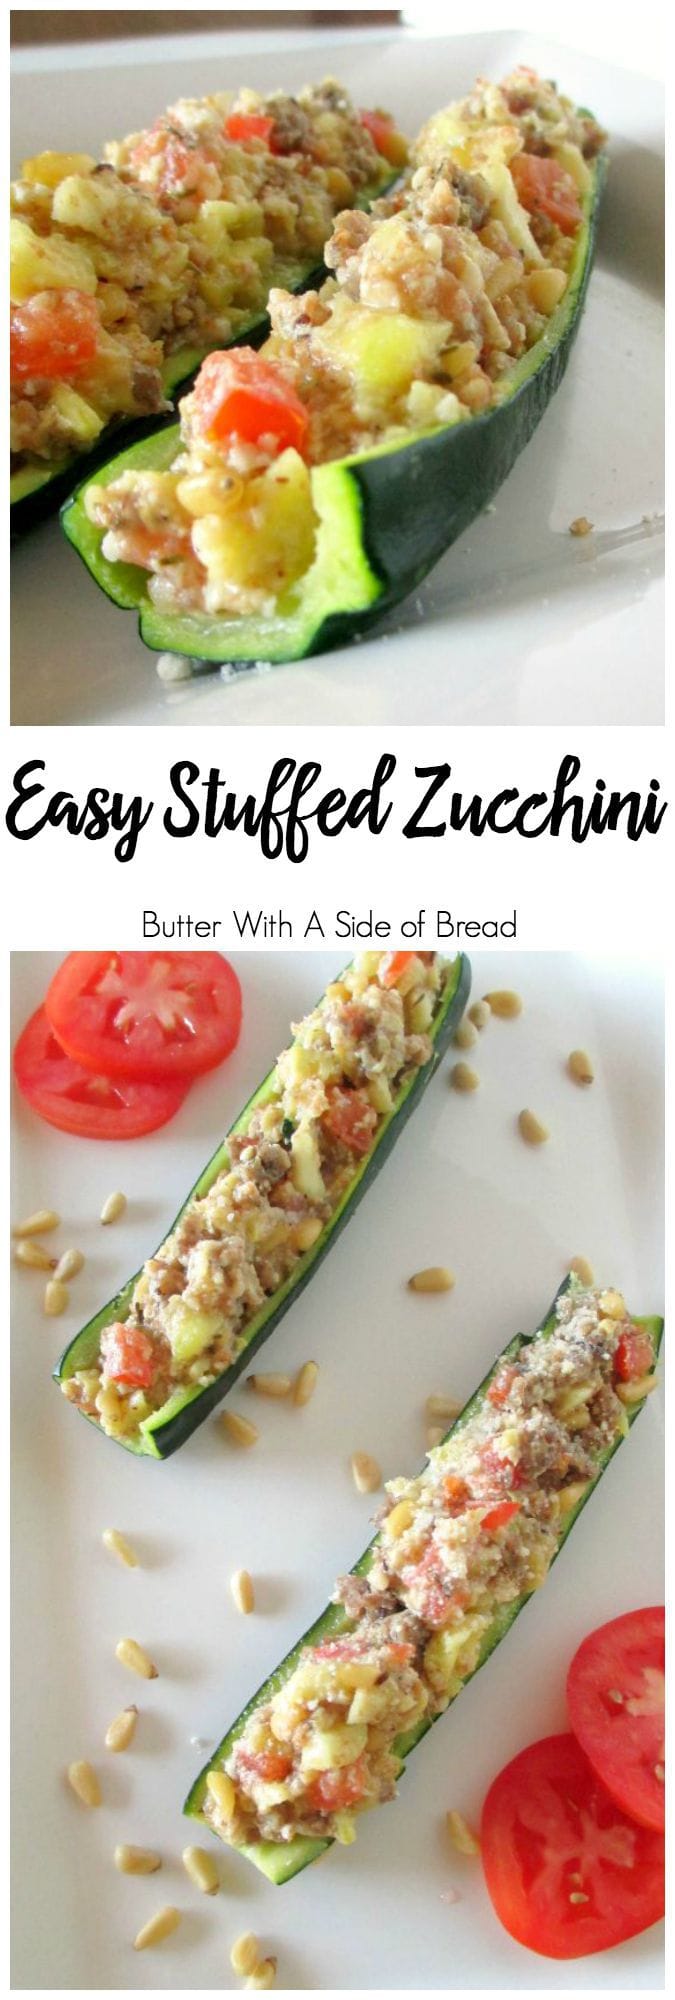 Our Easy Stuffed Zucchini is a simple, flavorful recipe that everyone enjoys. You can make the entire dish in the microwave- or put it on the grill!